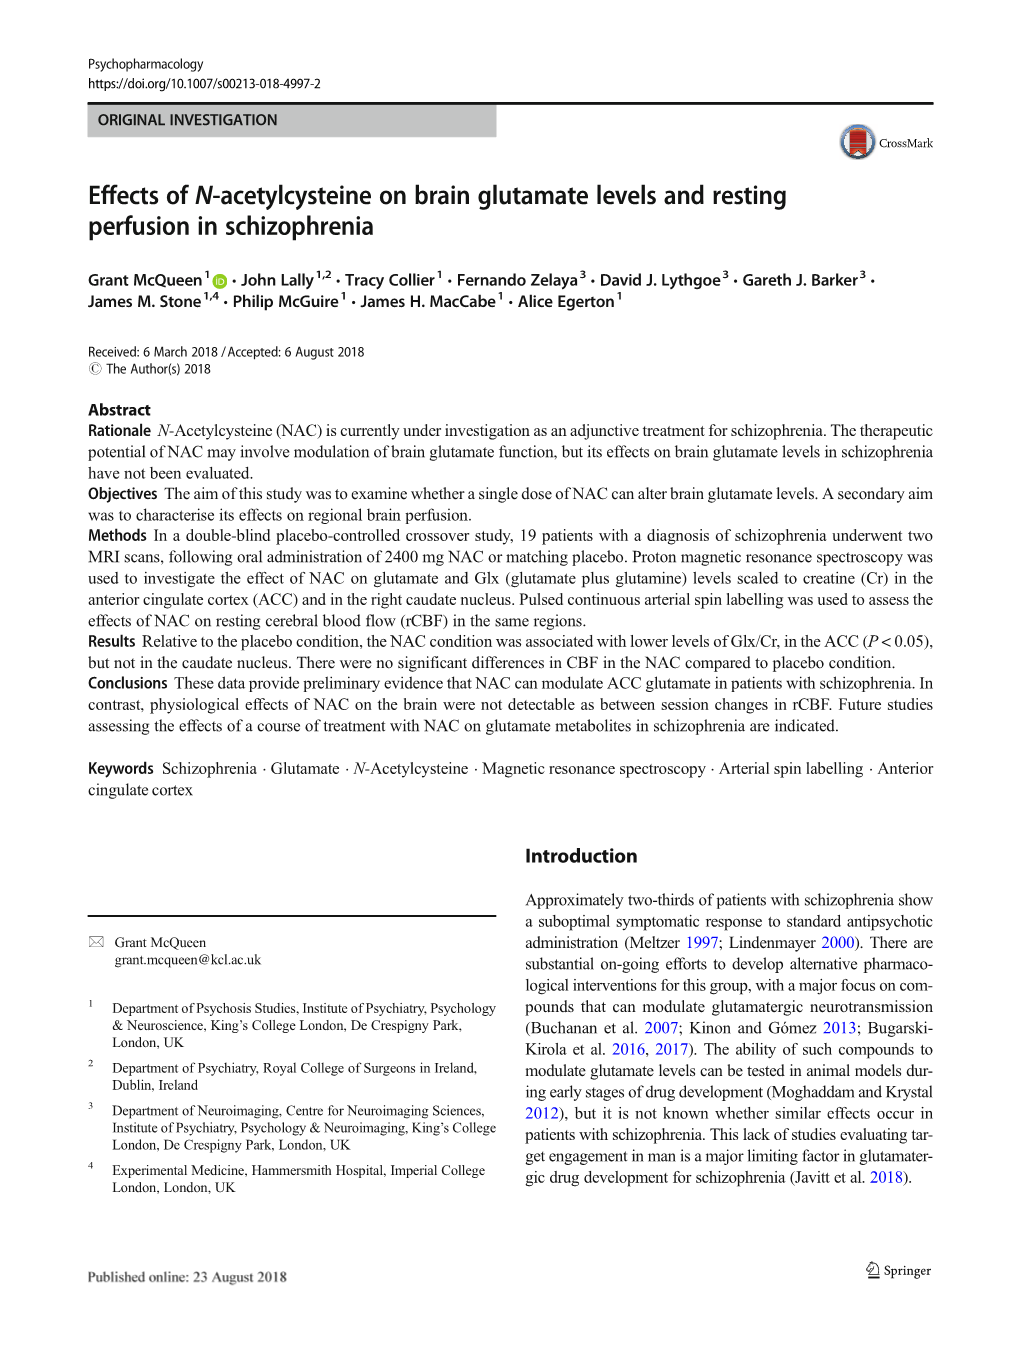 Effects of N-Acetylcysteine on Brain Glutamate Levels and Resting Perfusion in Schizophrenia